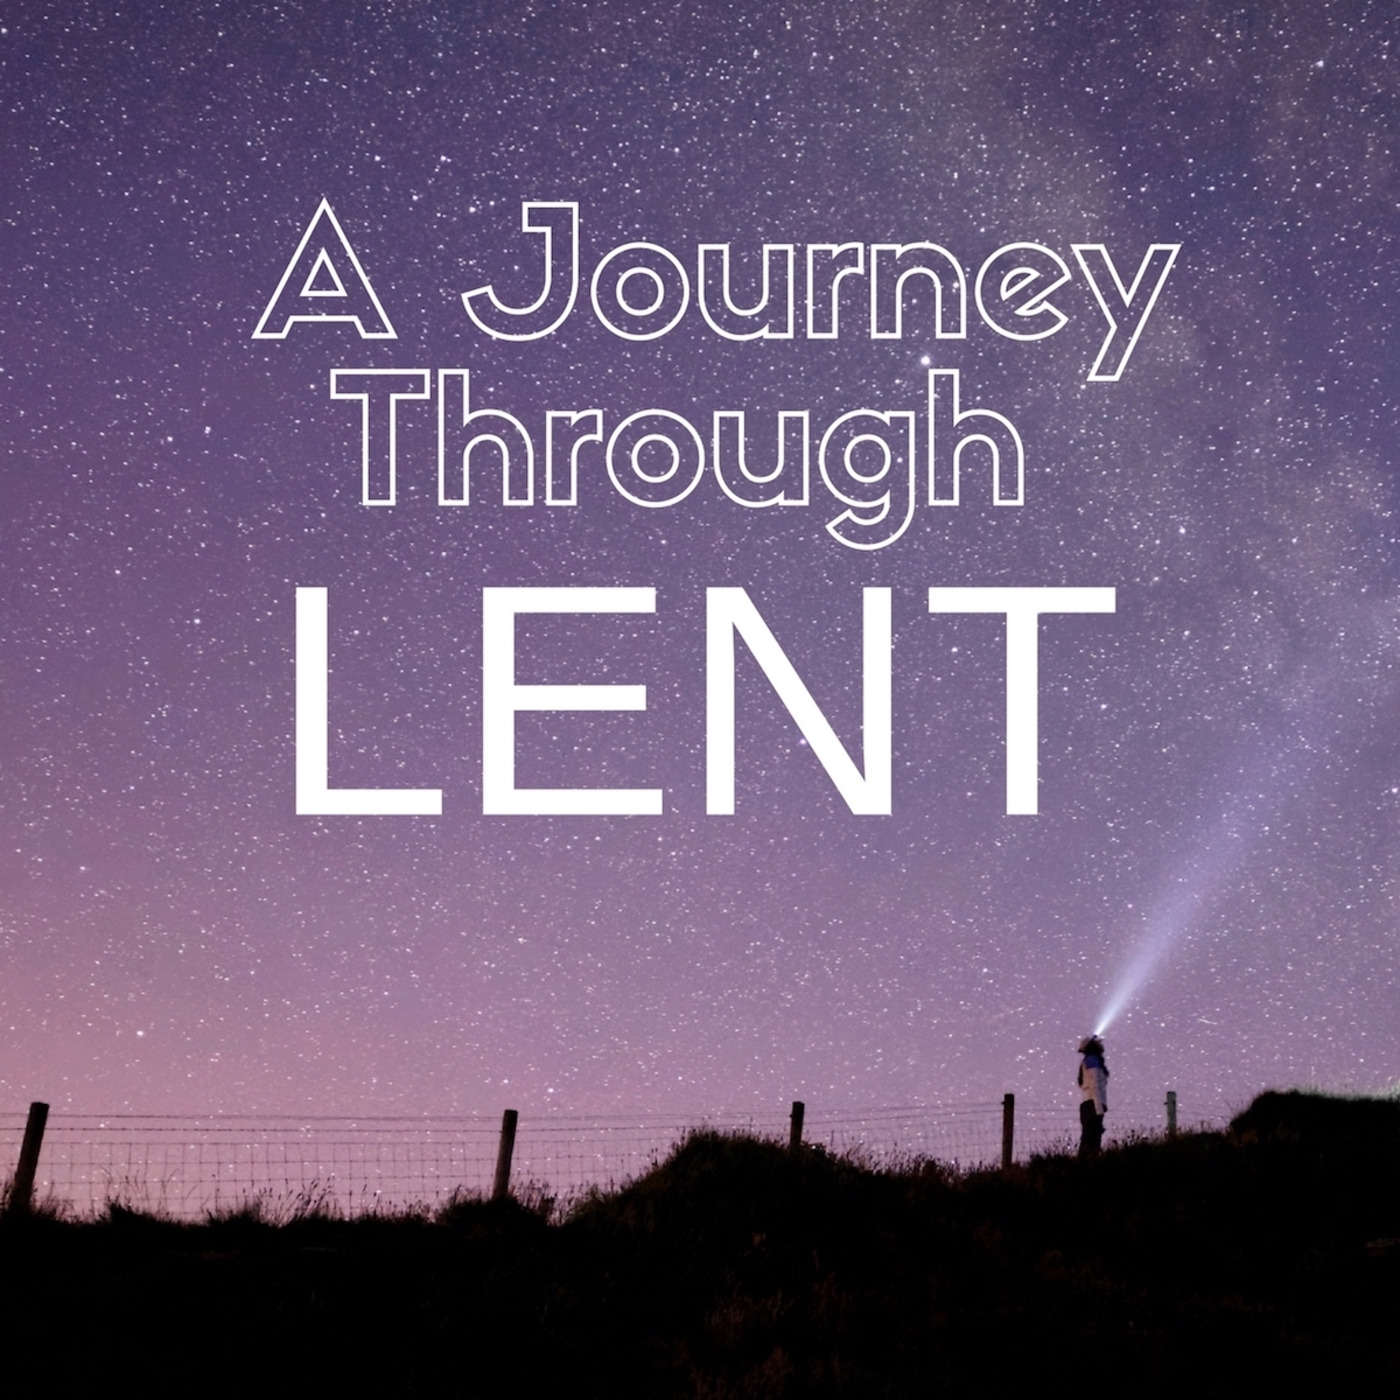 33 The Fifth Sunday in the season of Lent